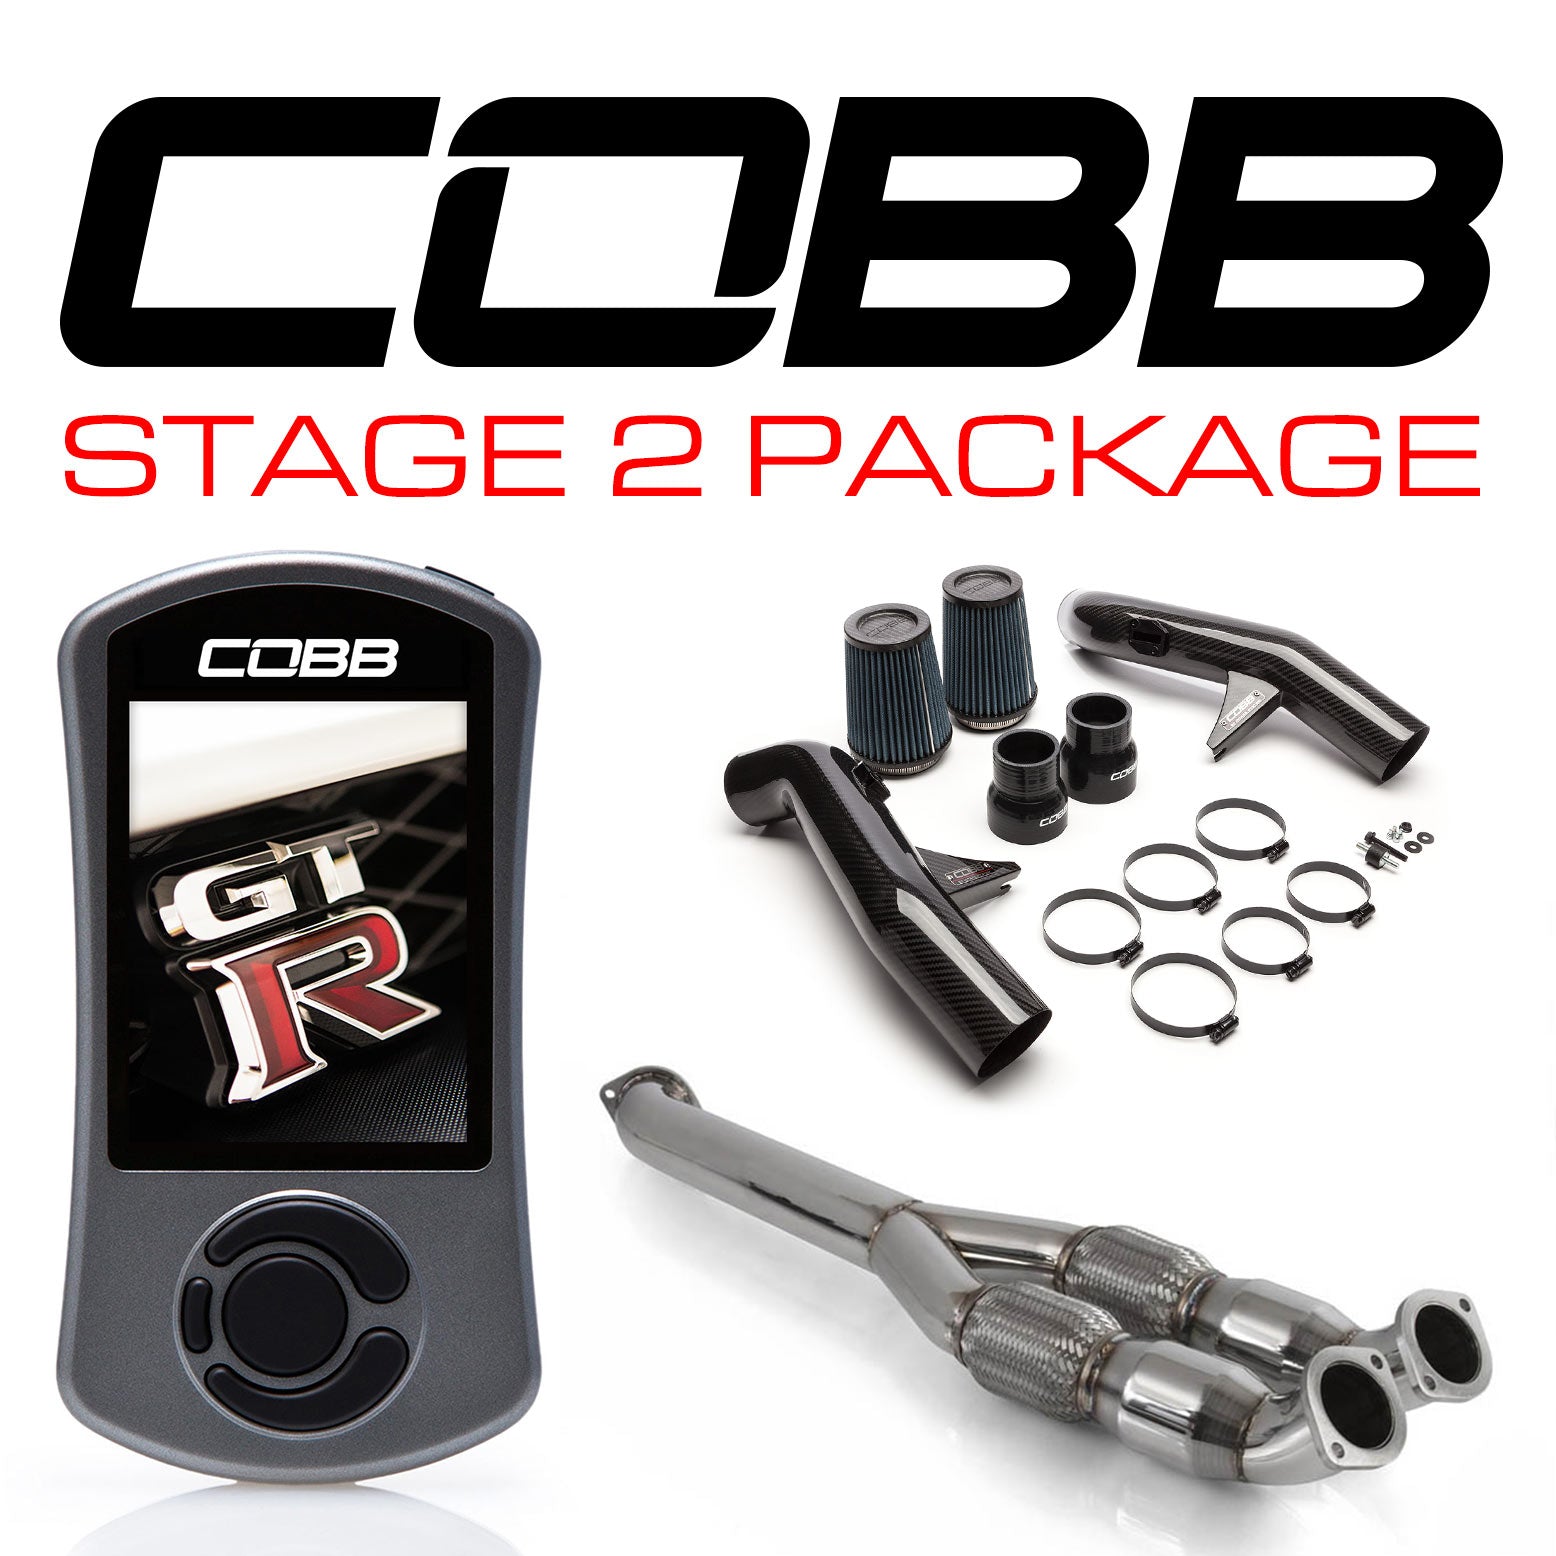 NISSAN GT-R STAGE 2 CARBON FIBER POWER PACKAGE NIS-006 WITH TCM FLASHING